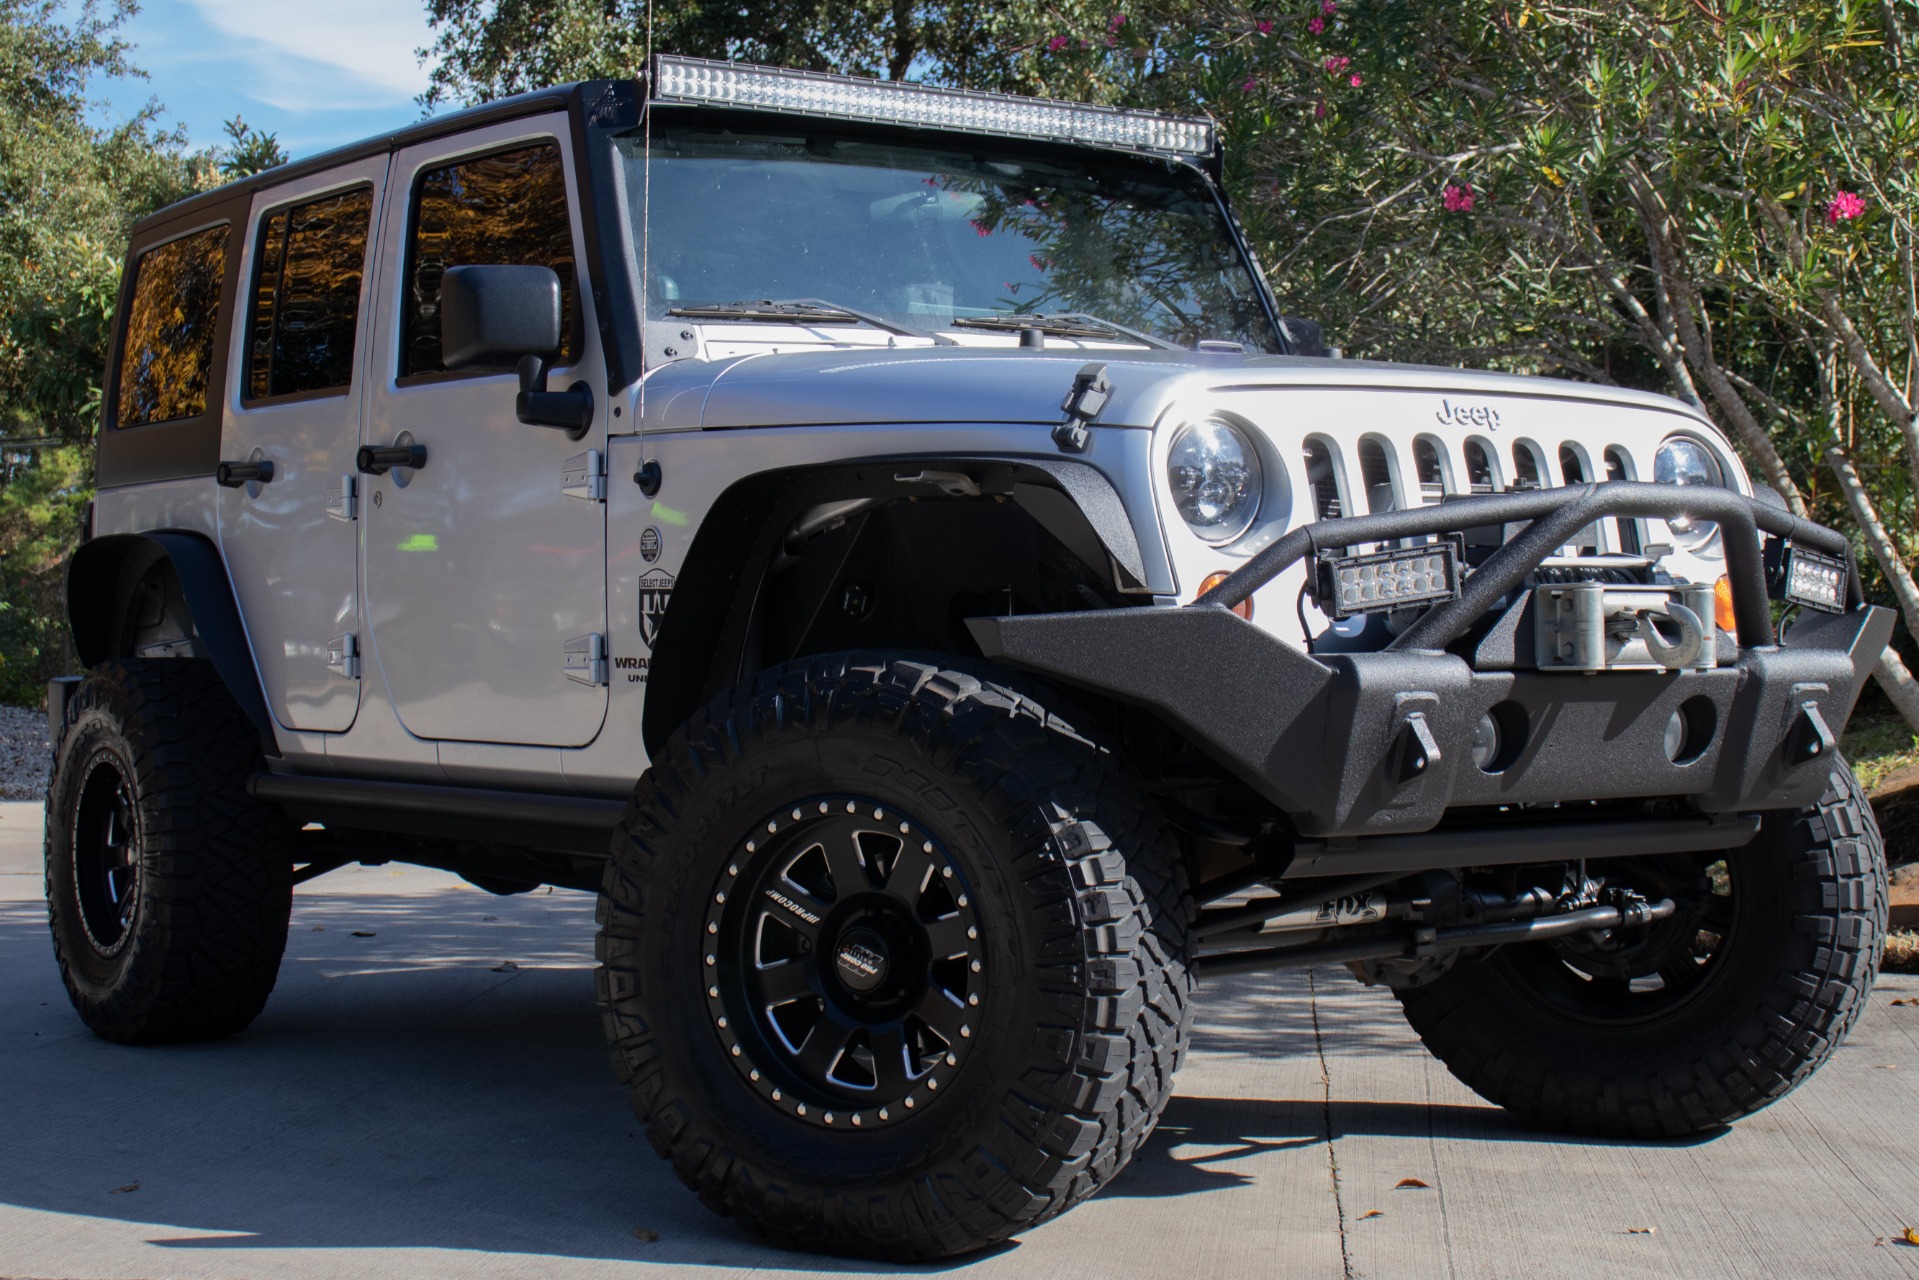 Used 2008 Jeep Wrangler Unlimited X  For Sale 22 995 